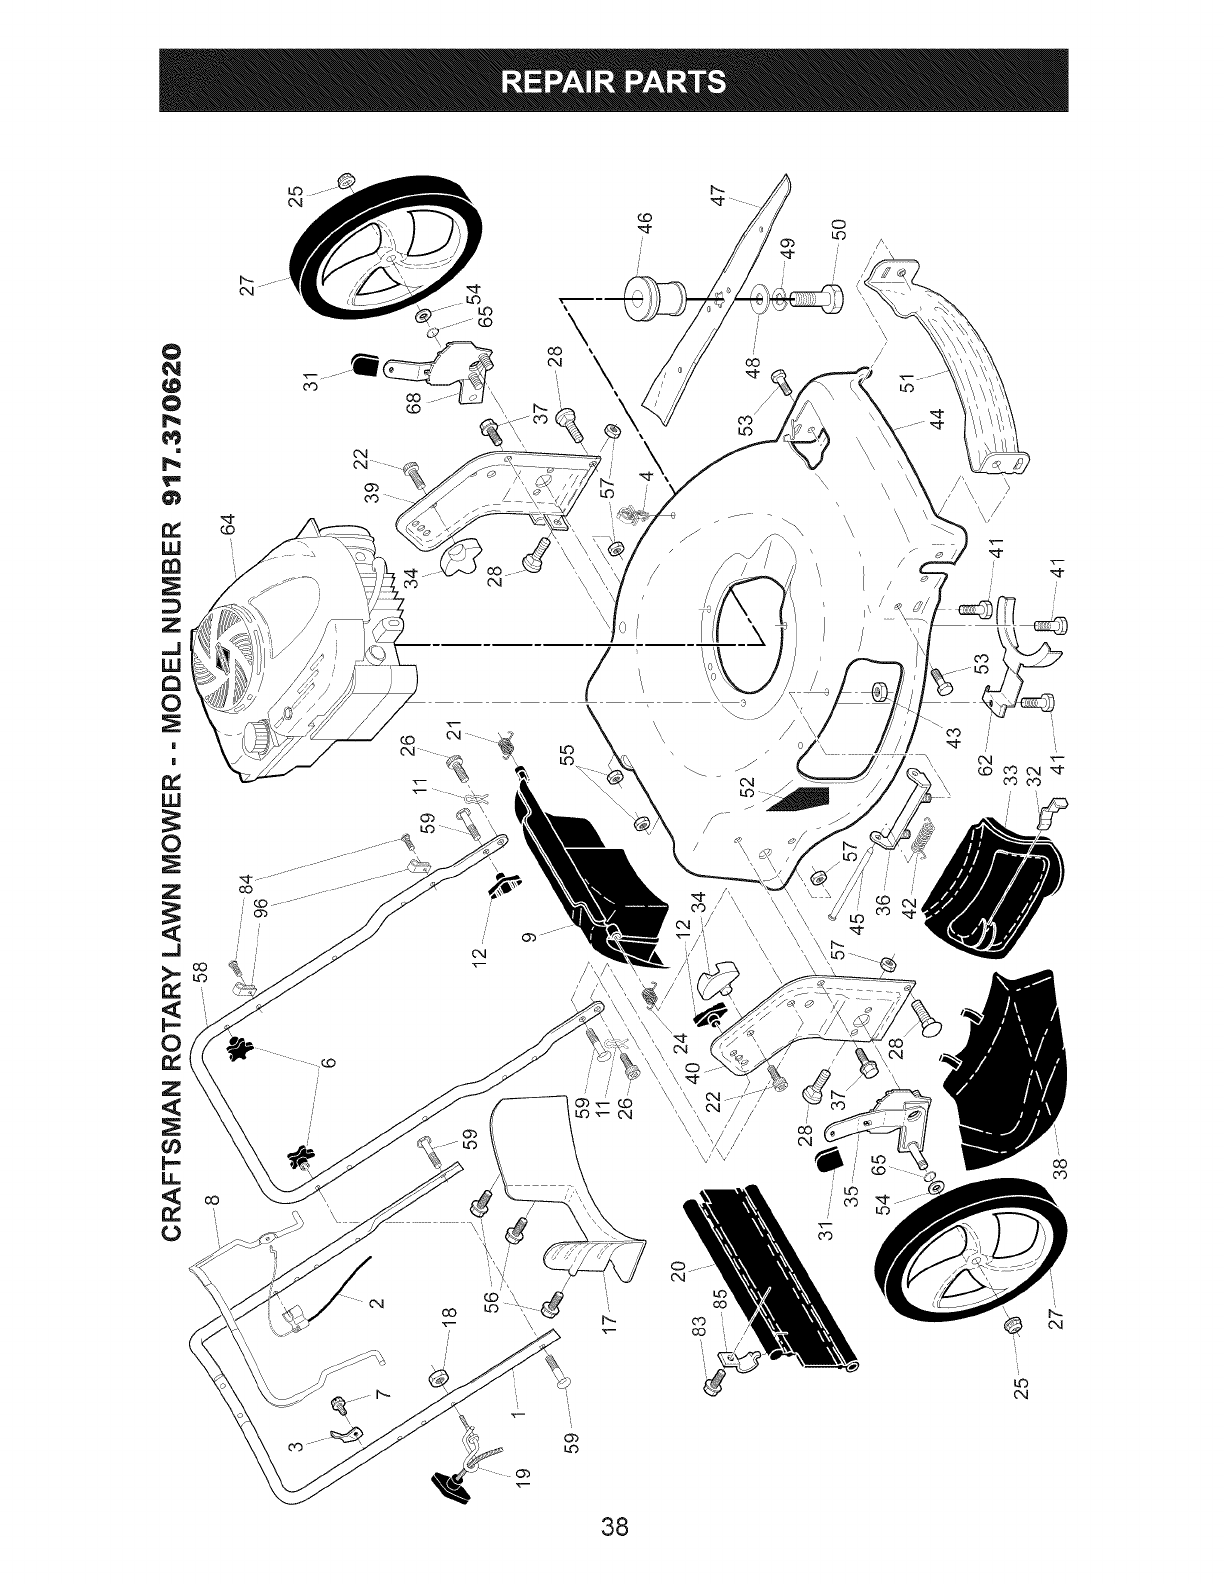 Page 38 of Craftsman Lawn Mower 917.370620 User Guide | ManualsOnline.com